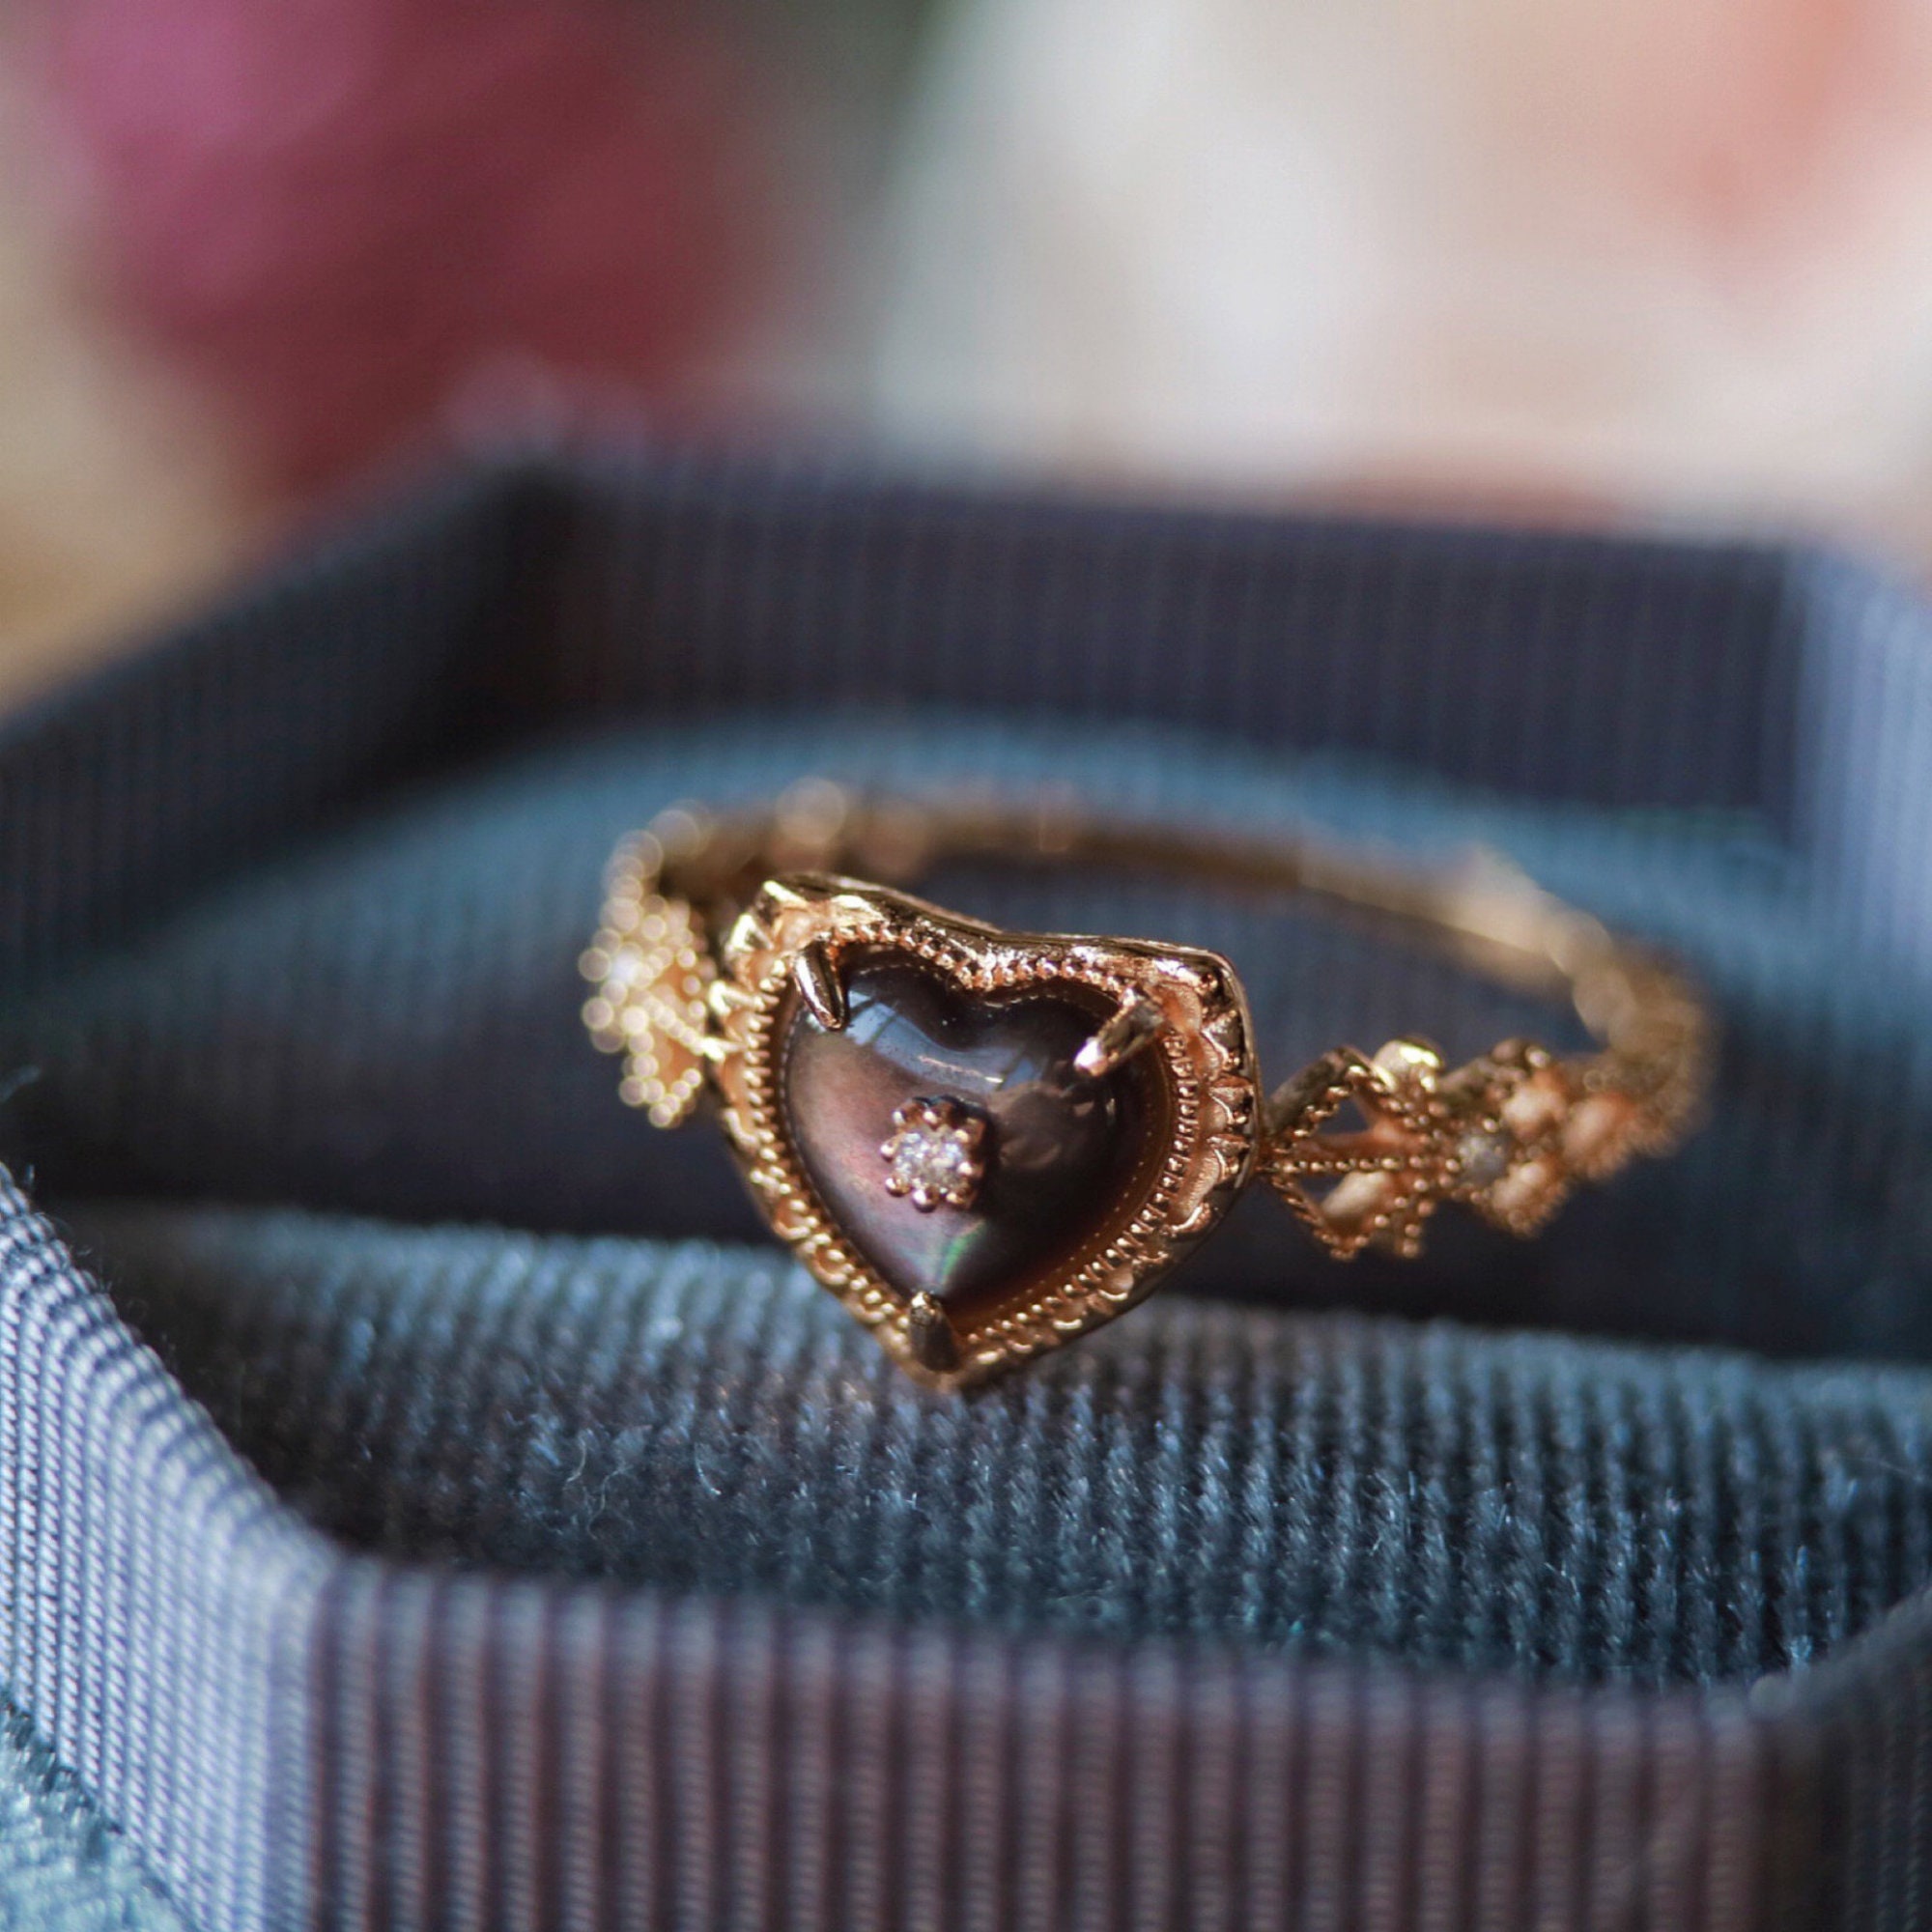 Heart ring with Diamonds and 18k solid gold – Vivien Frank Designs